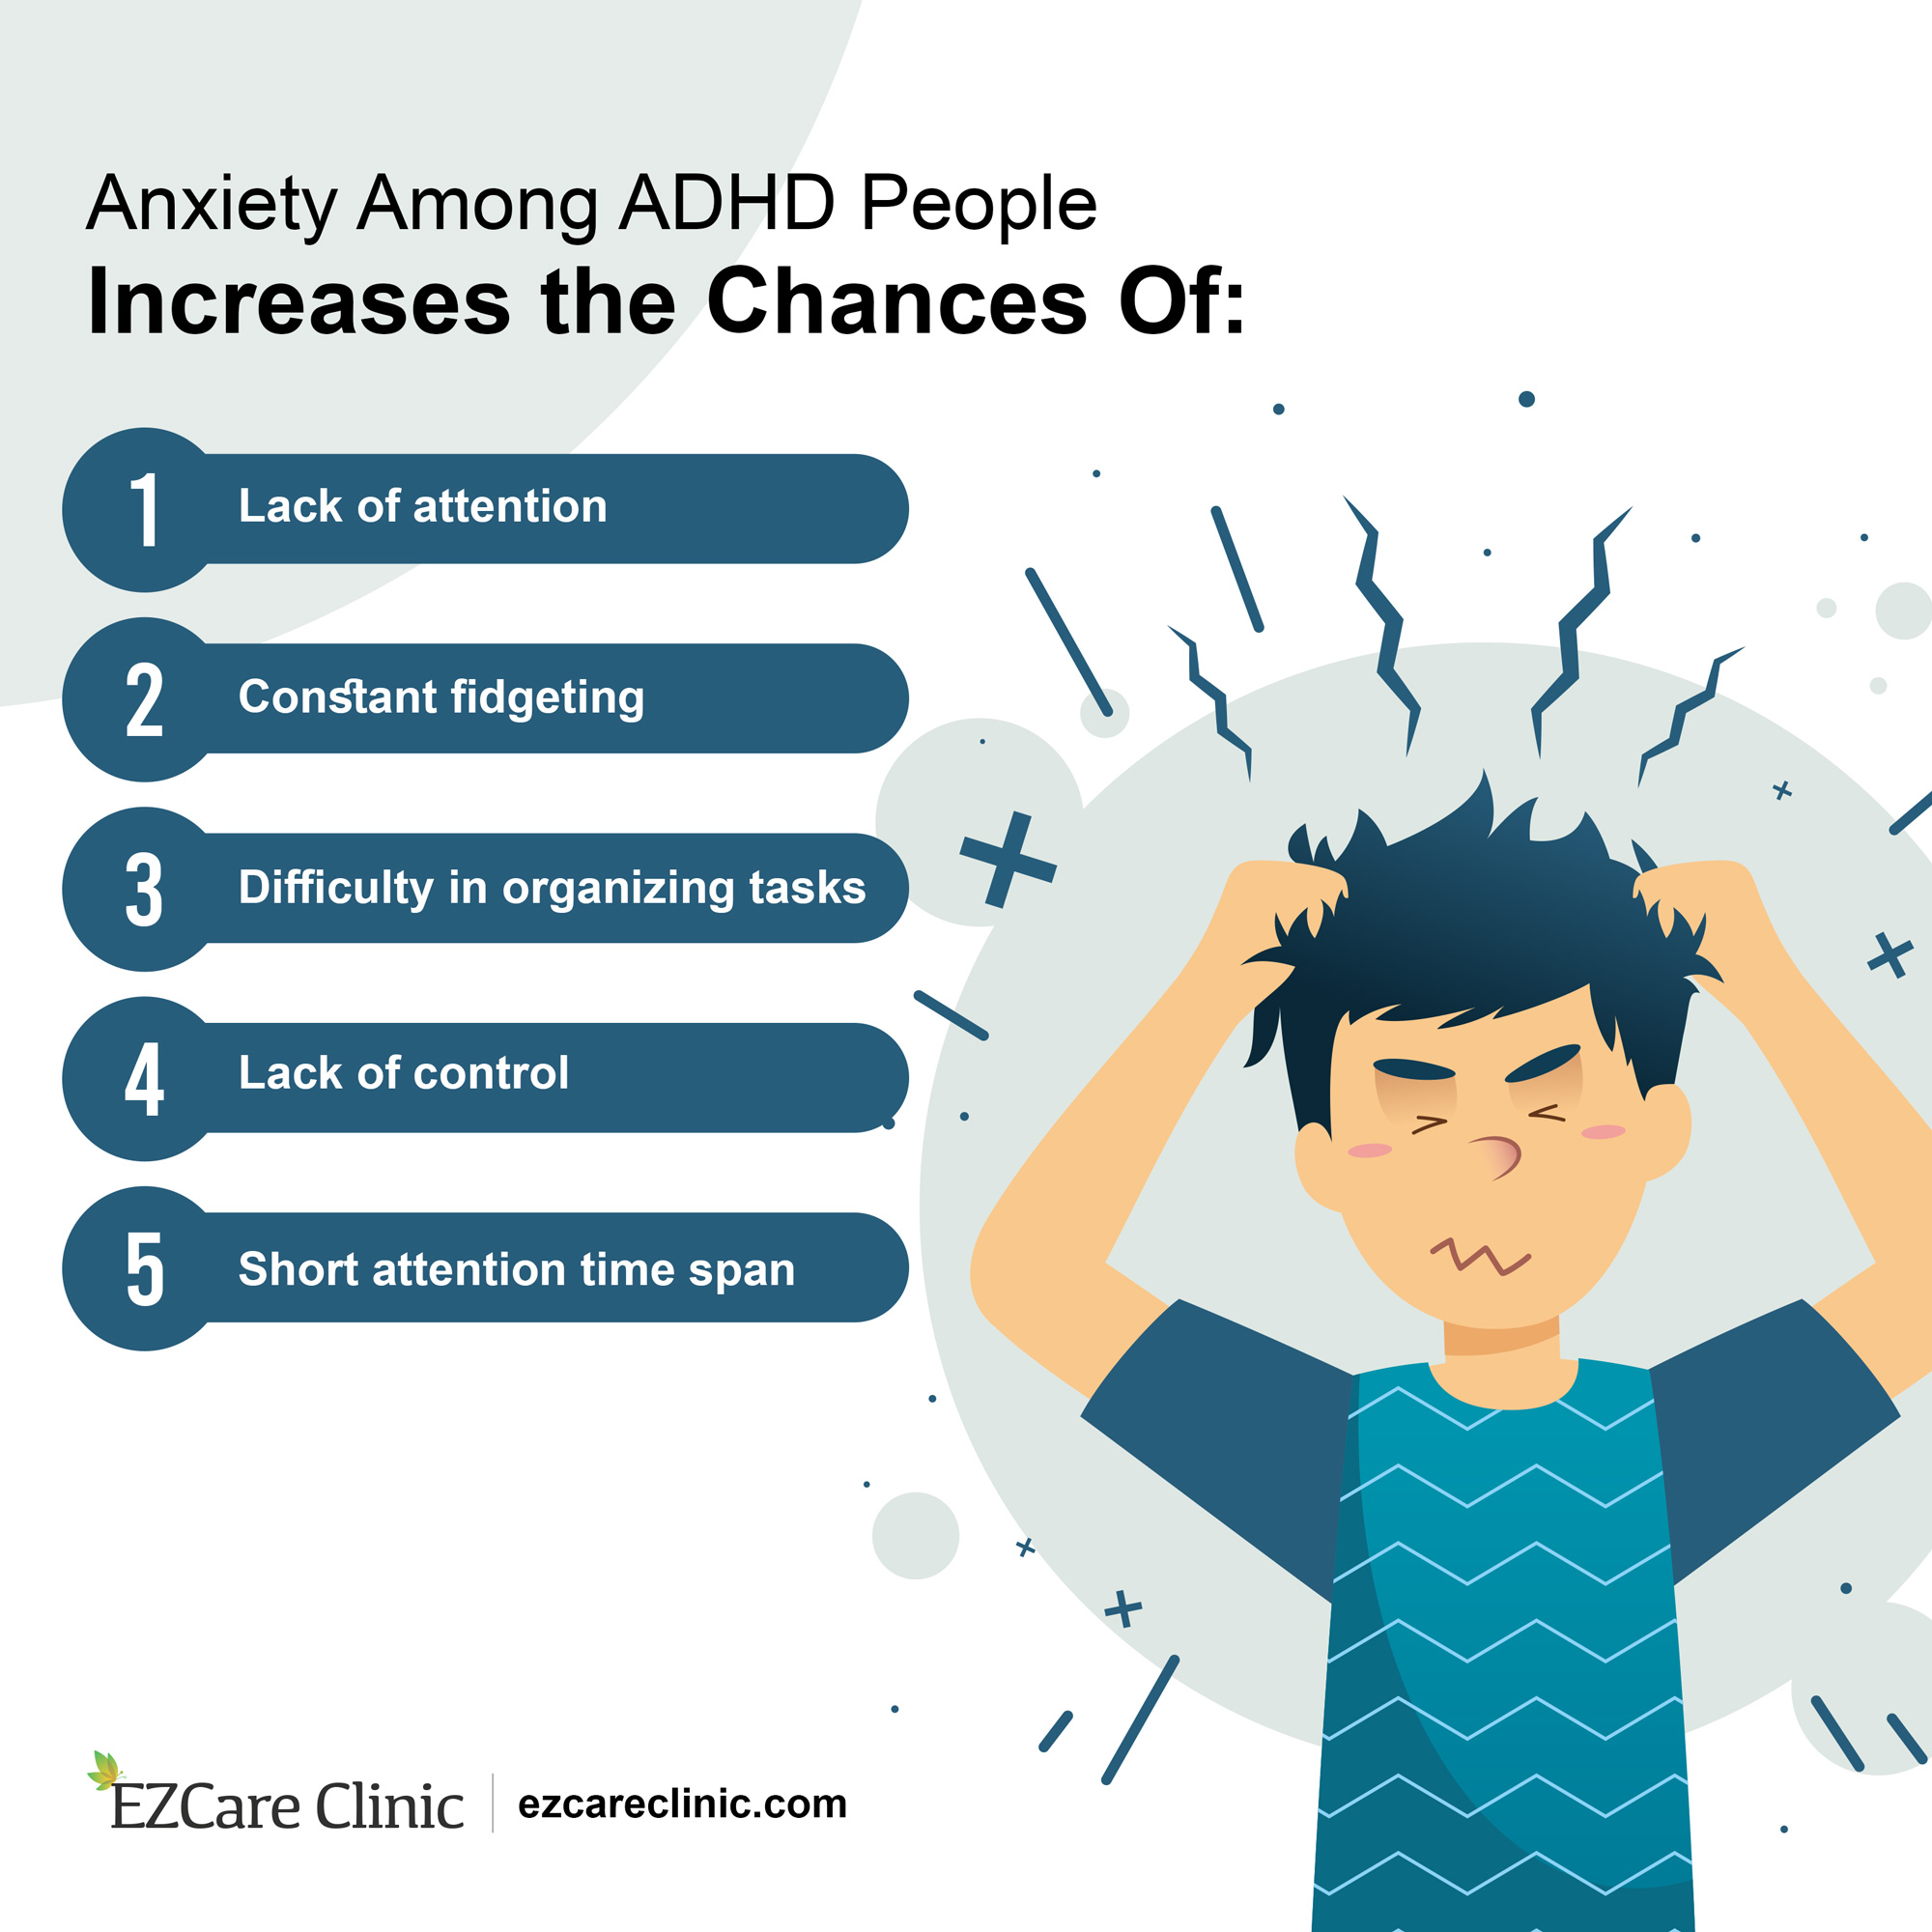 Does Stress and Anxiety Trigger ADHD?